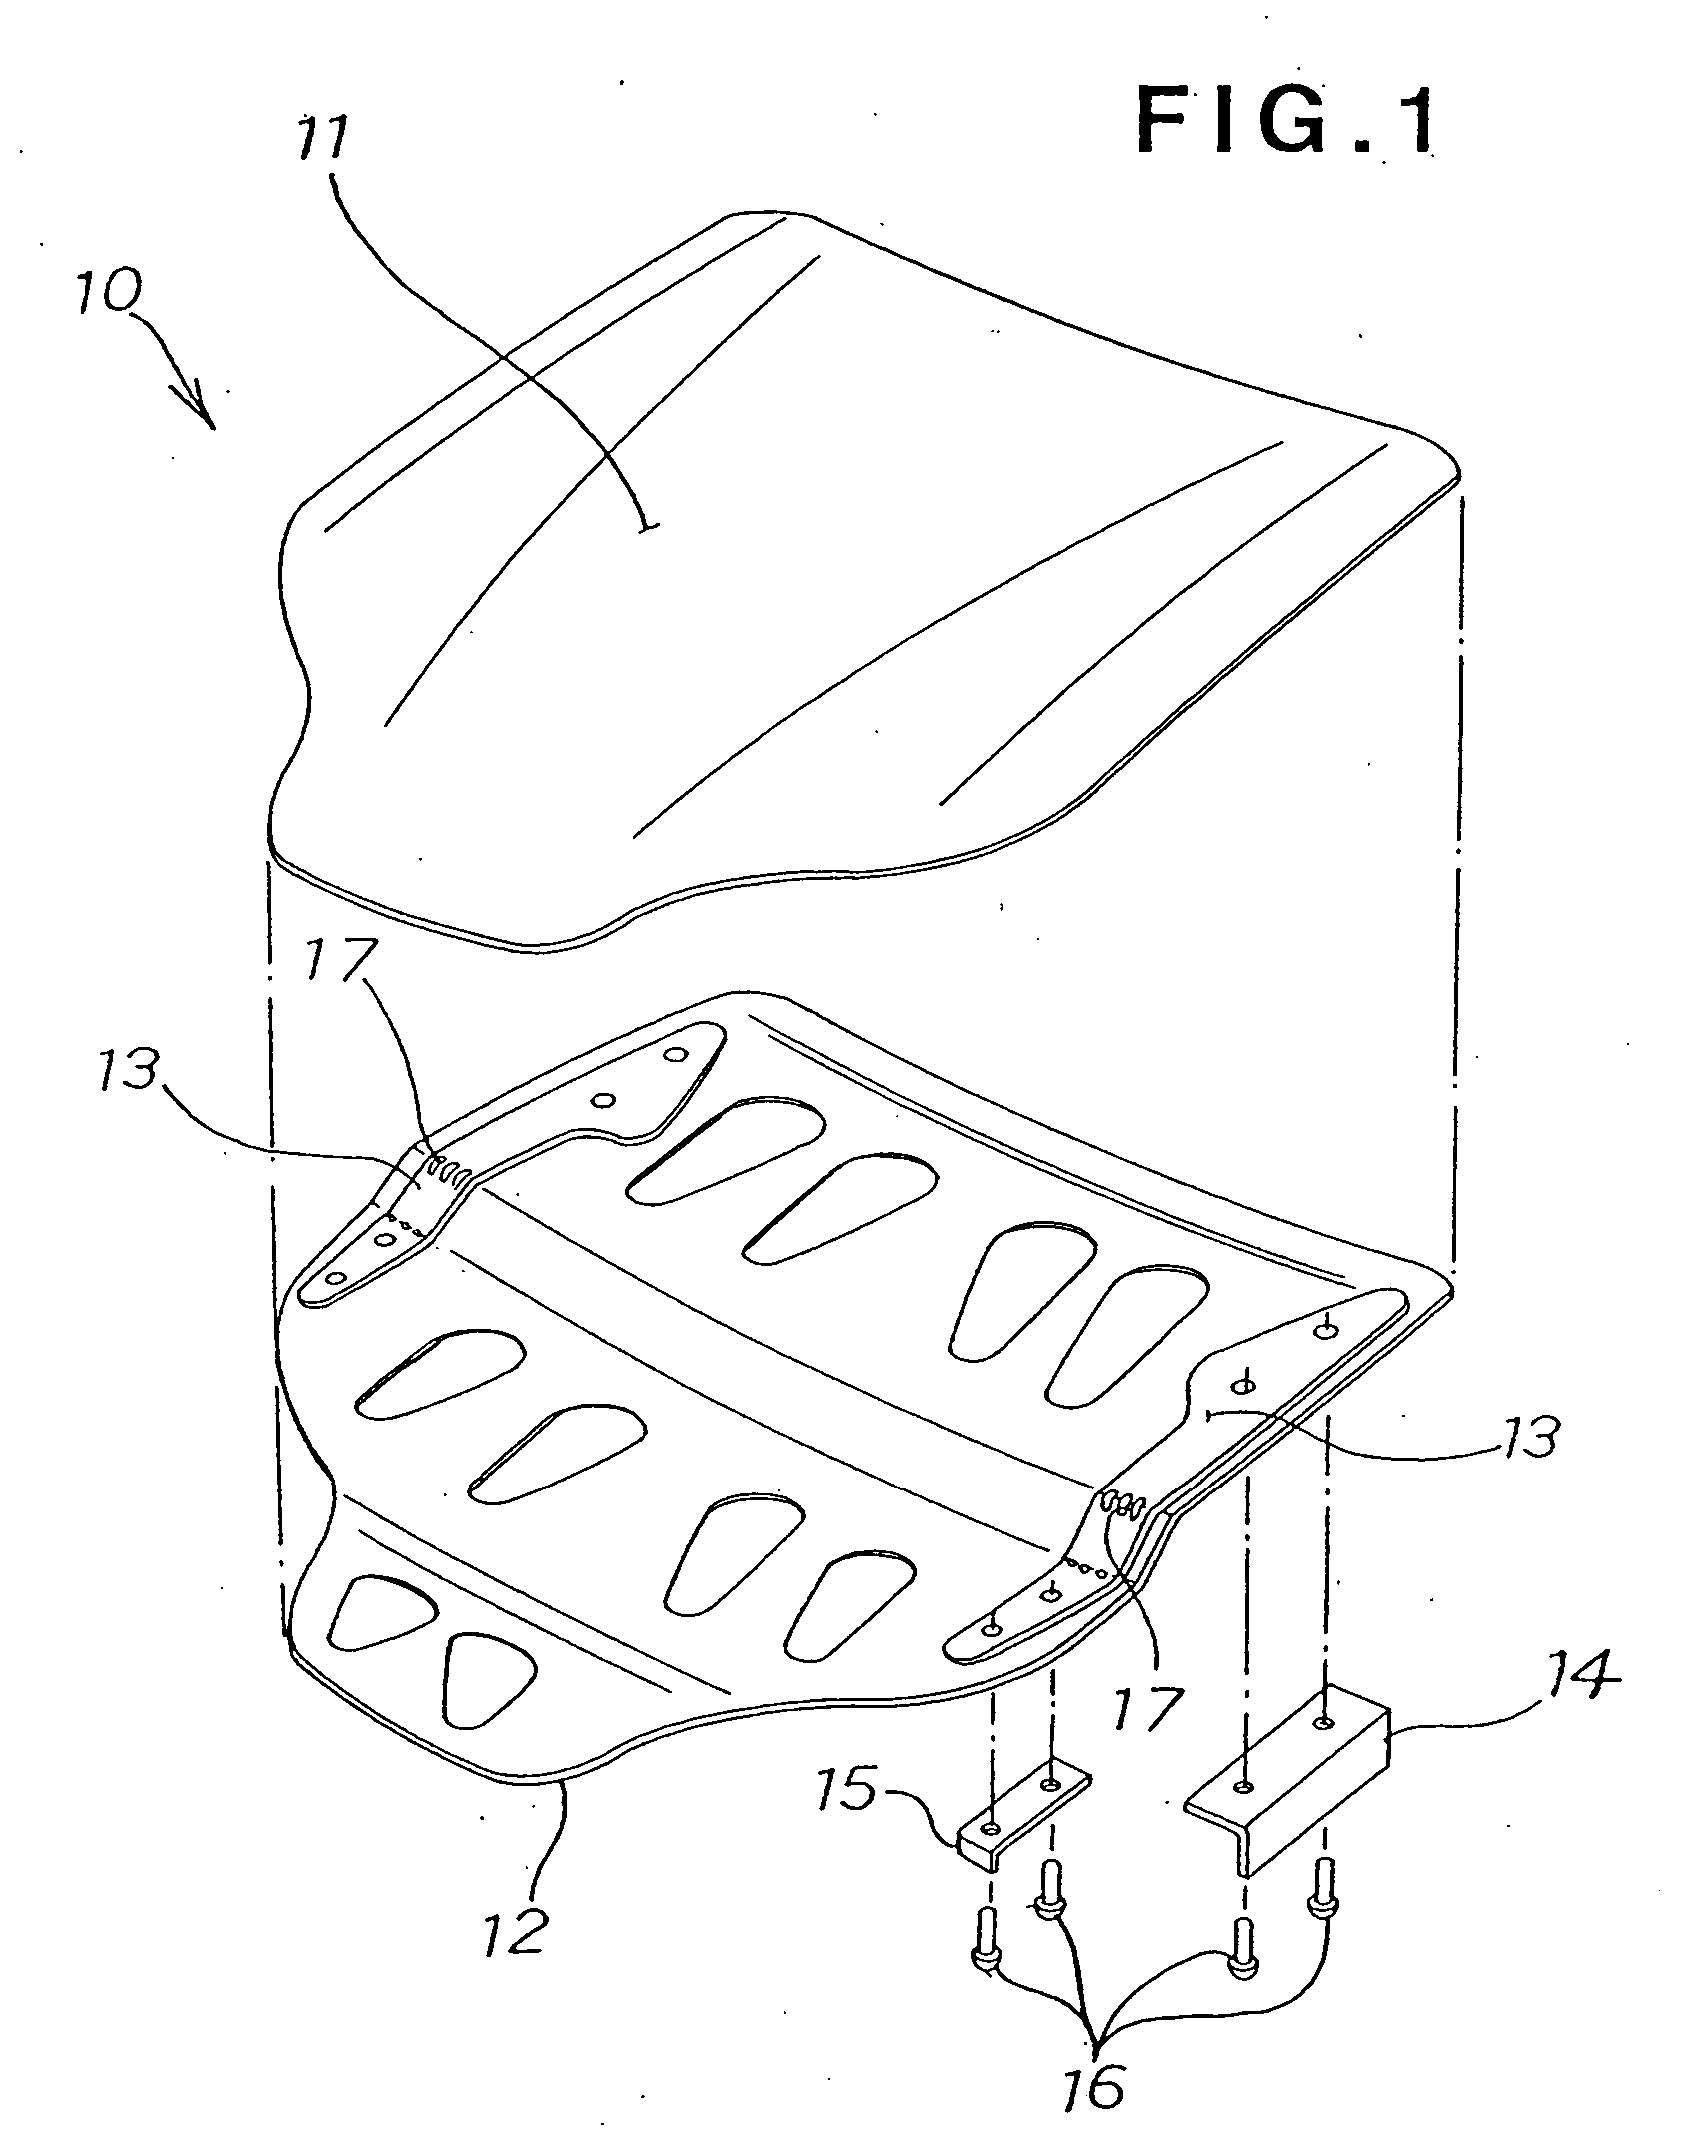 Vehicular body panel or component part and method for manufacturing same